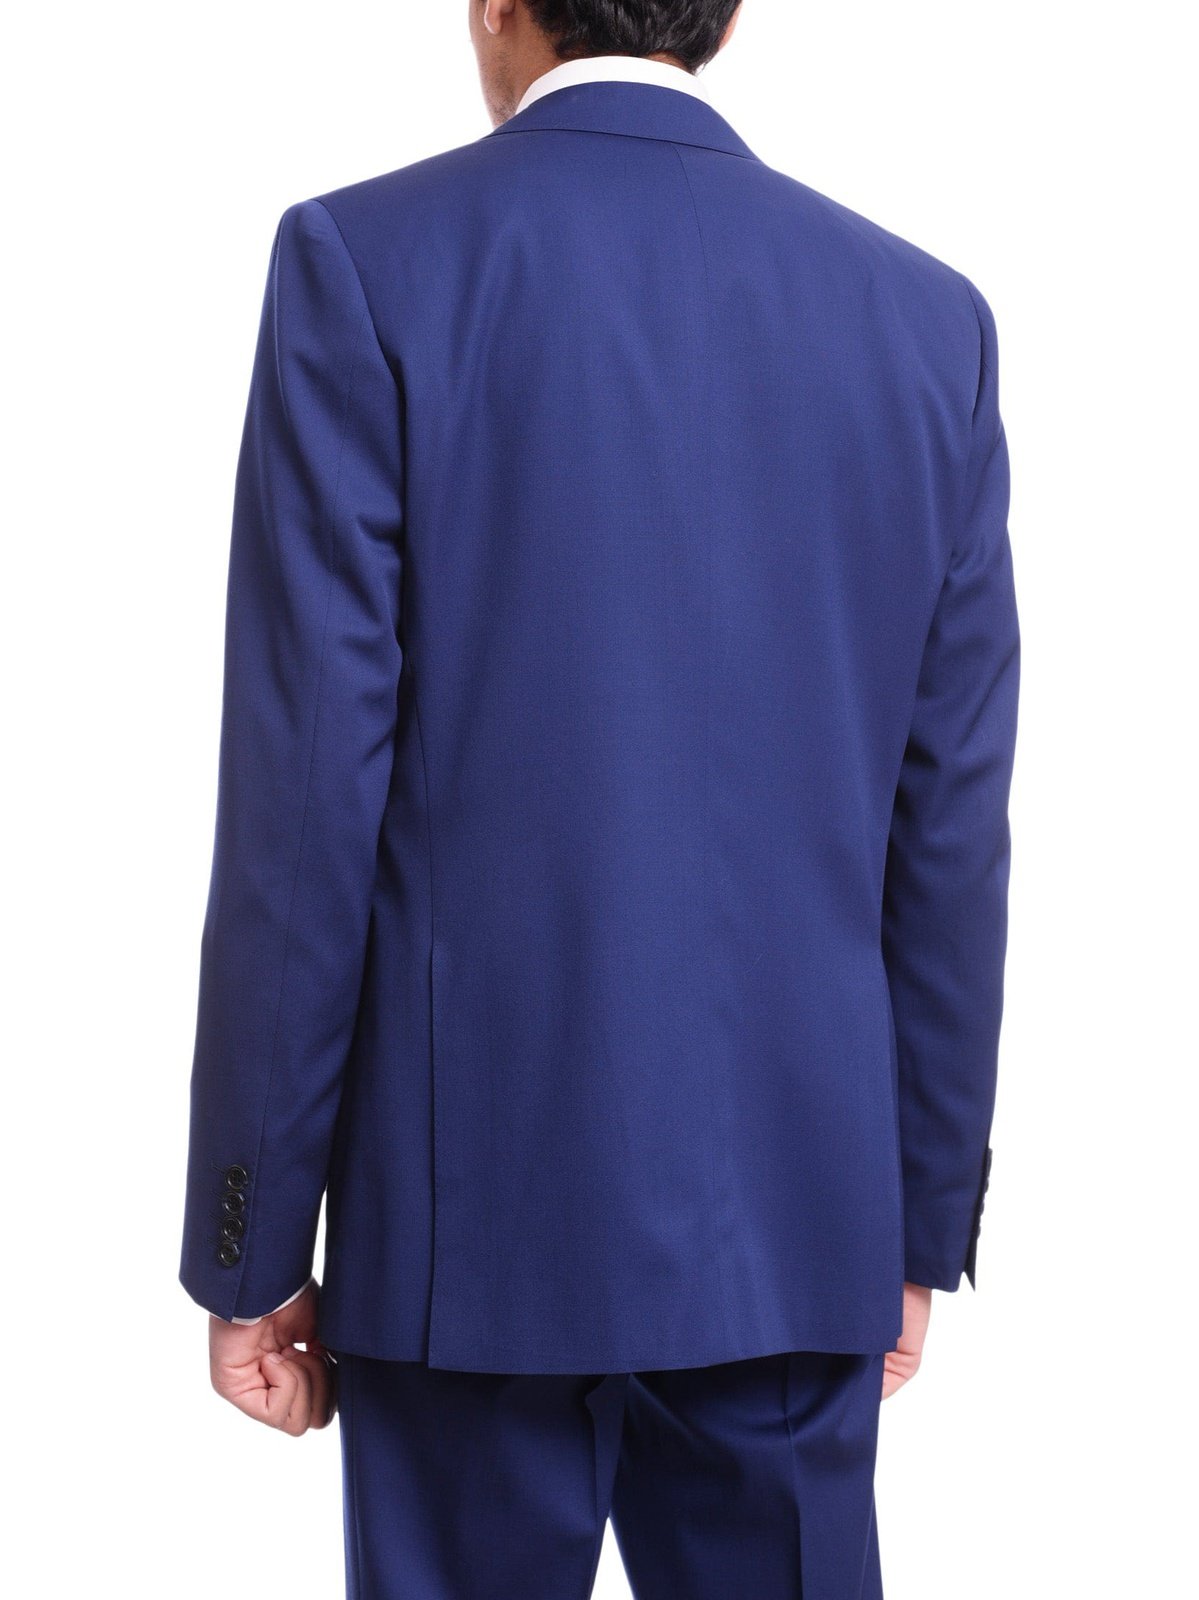 Napoli TWO PIECE SUITS Men's Napoli Slim Fit Solid Royal Blue Half Canvassed Two Button Reda Wool Suit